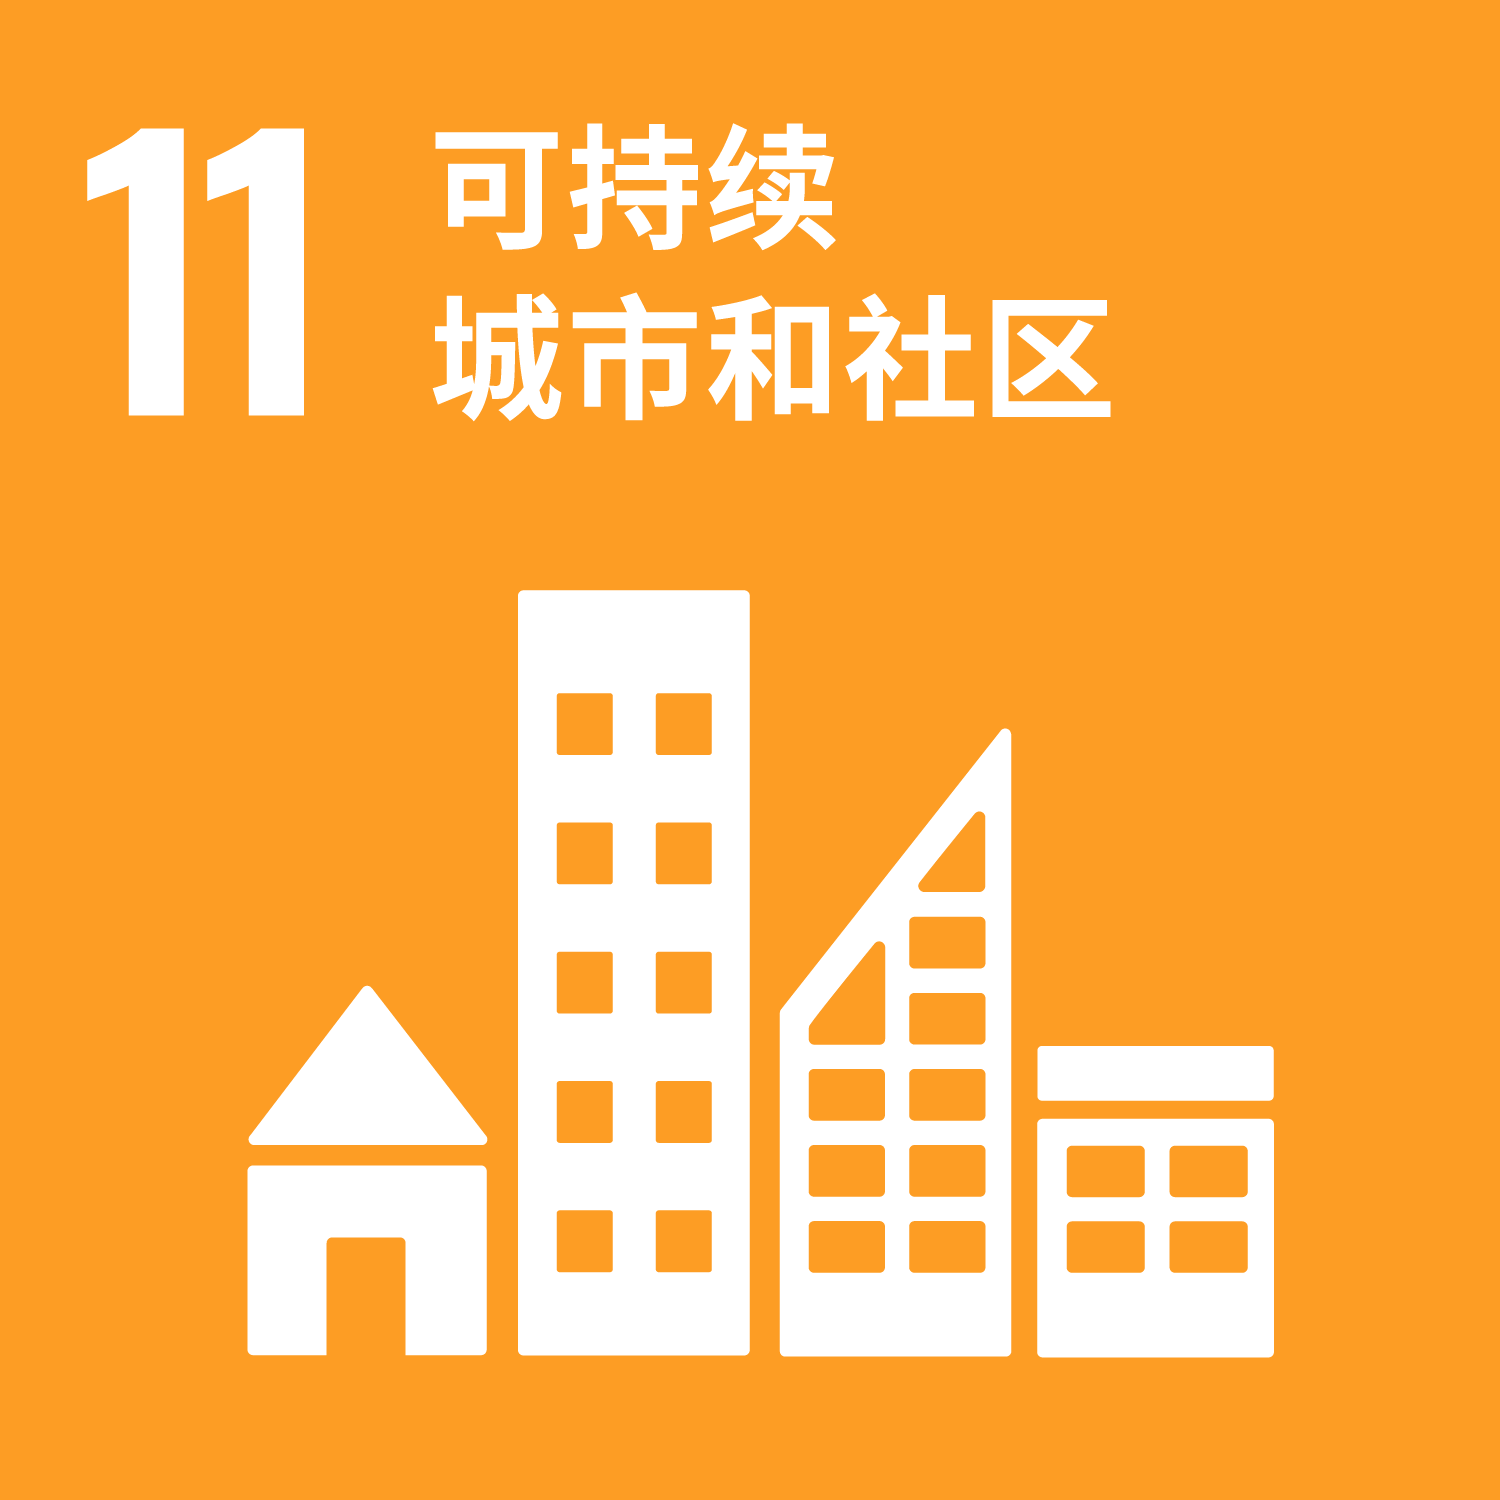 global commitment icon